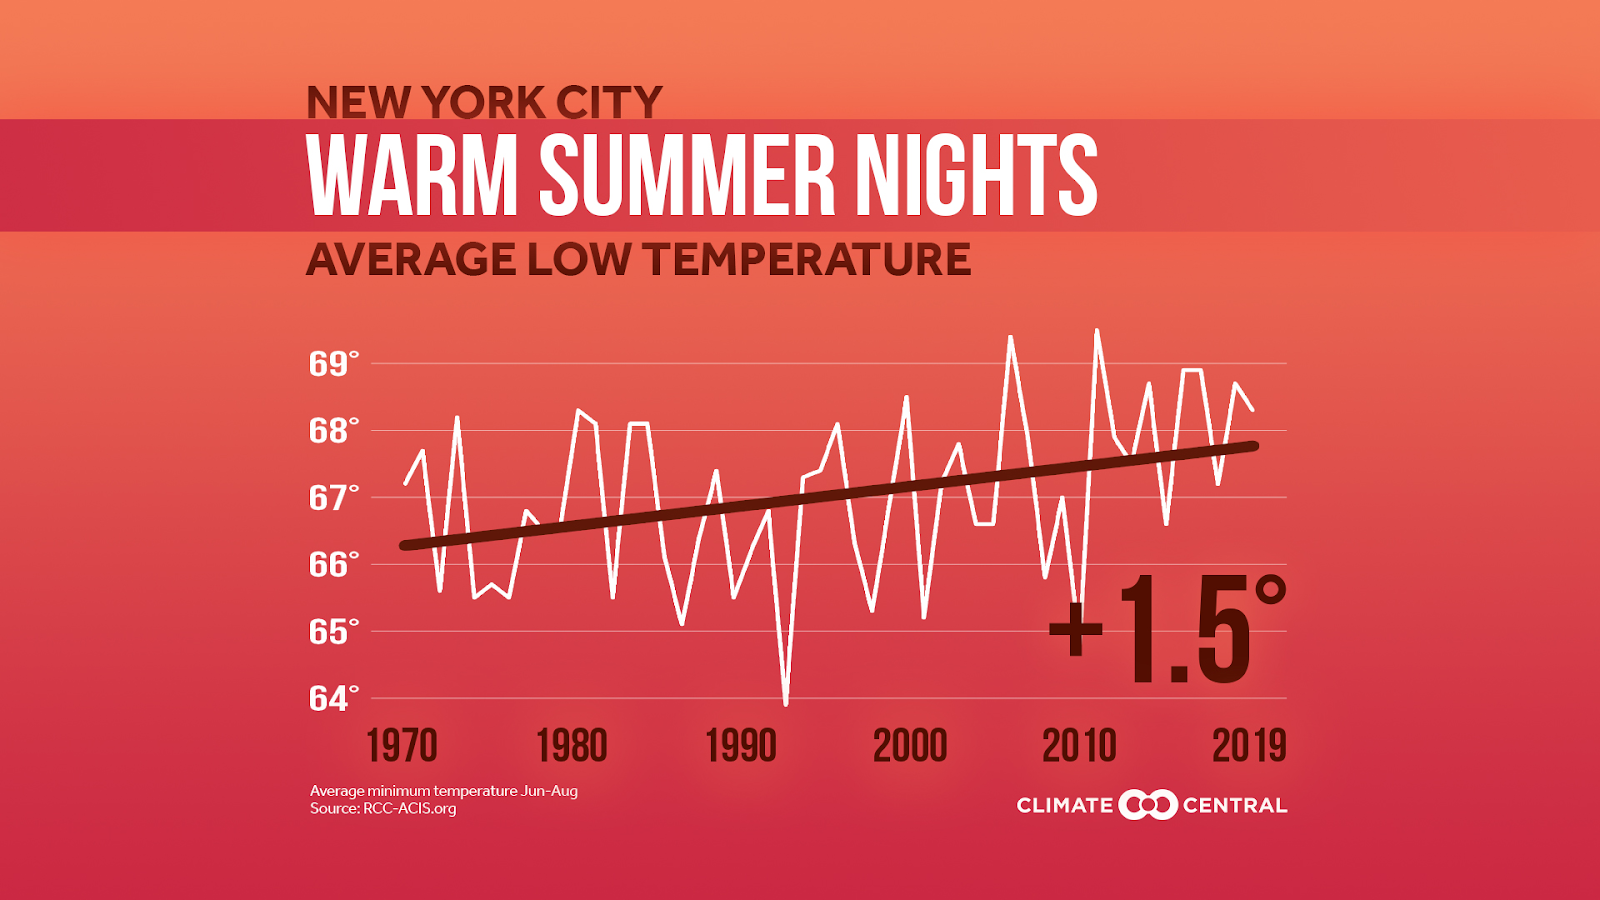 New York City heat trend. Image courtesy of Climate Central. United States, 2019.